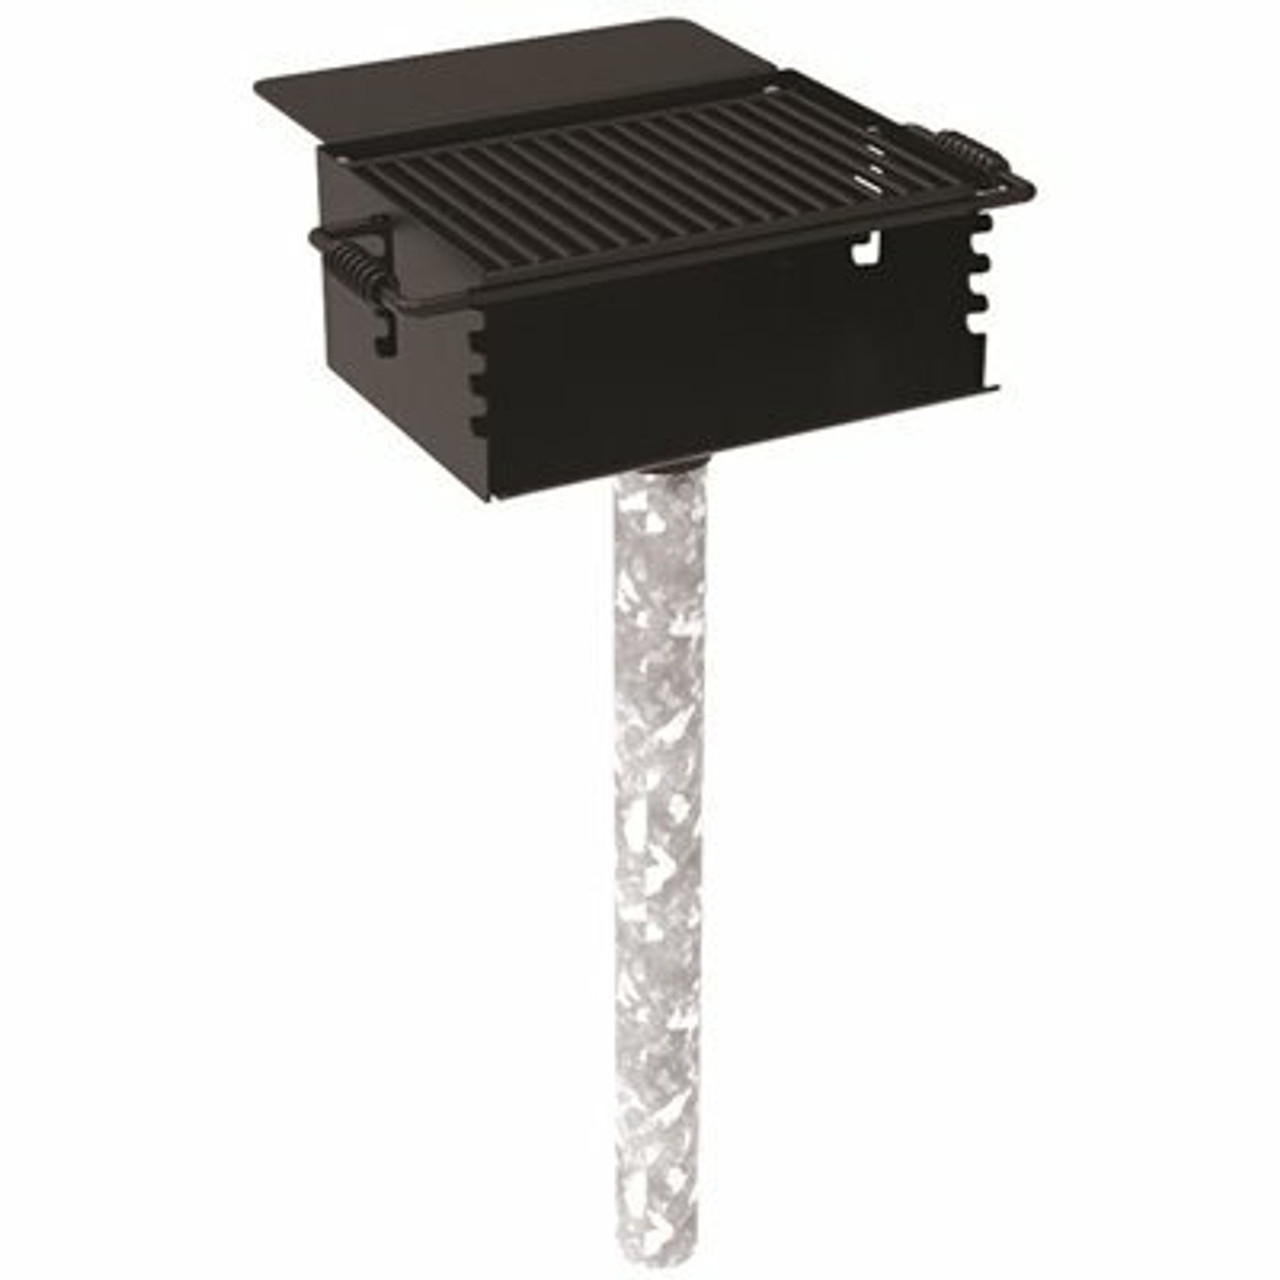 280 Sq. In. Rotating Flip-Back Commercial Pedestal Grill With Utility Shelf With In-Ground Mount Post In Black